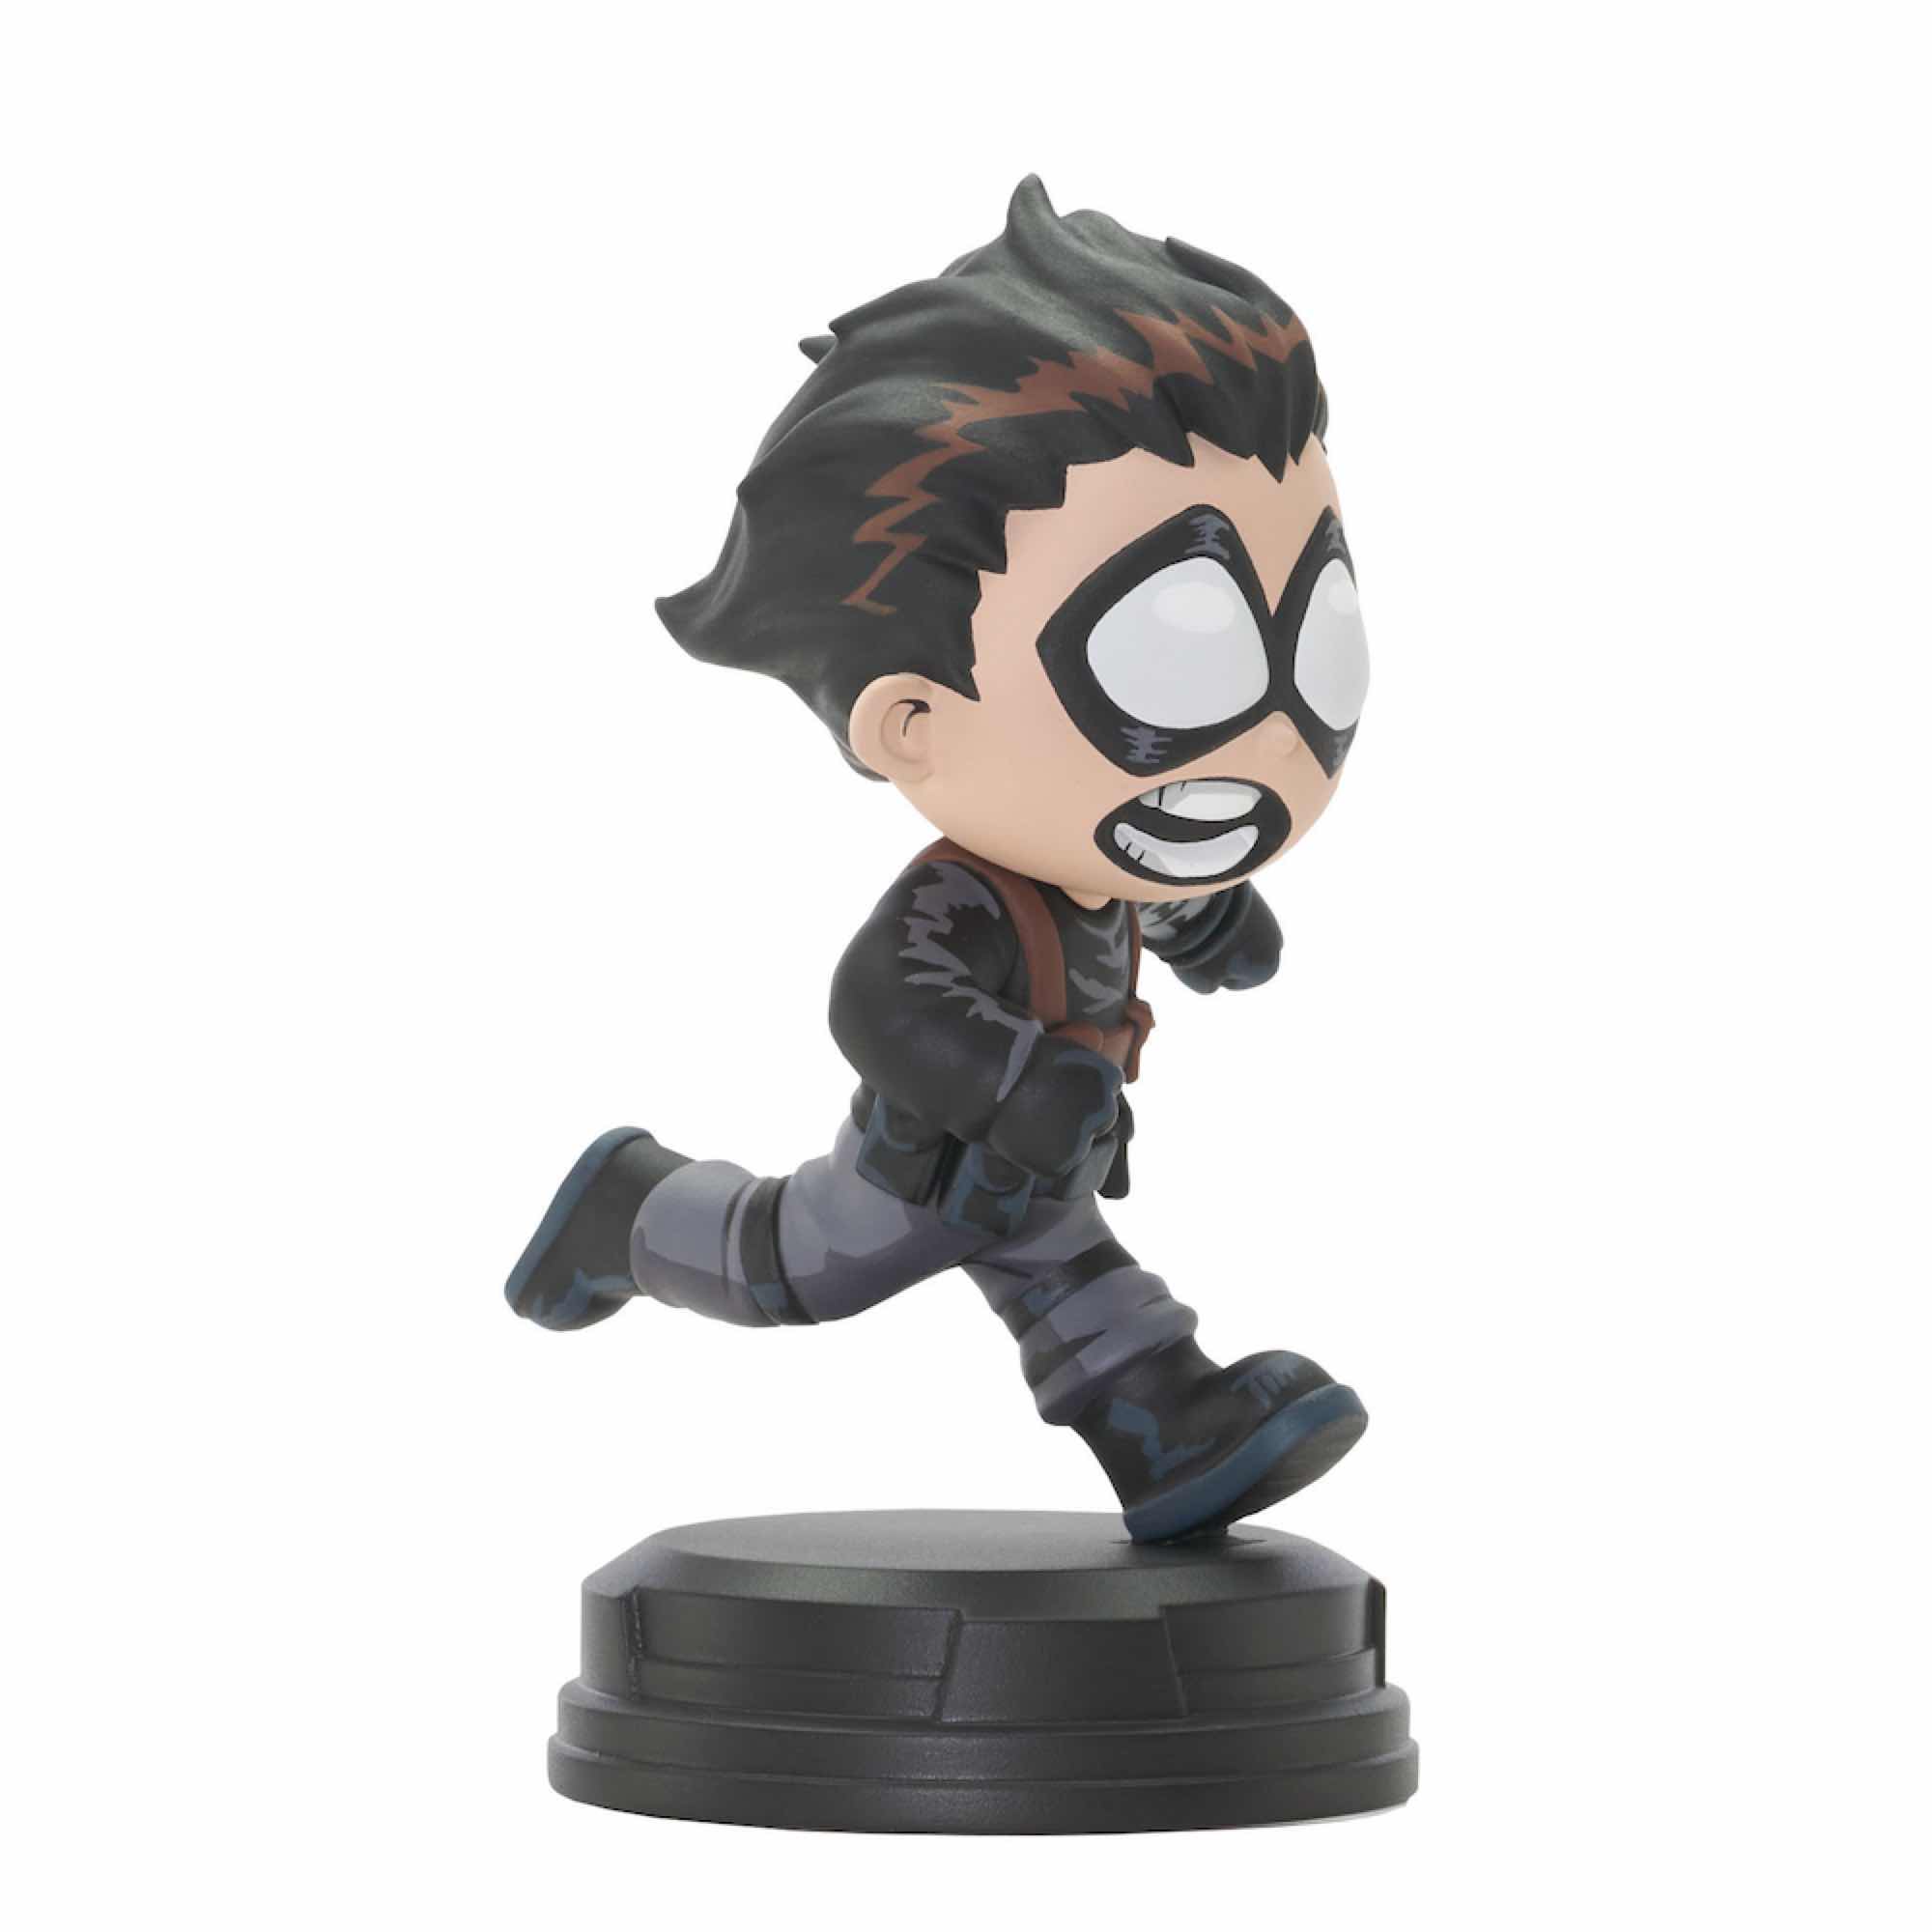 WINTER SOLDIER FIG 10 CM MARVEL ANIMATED